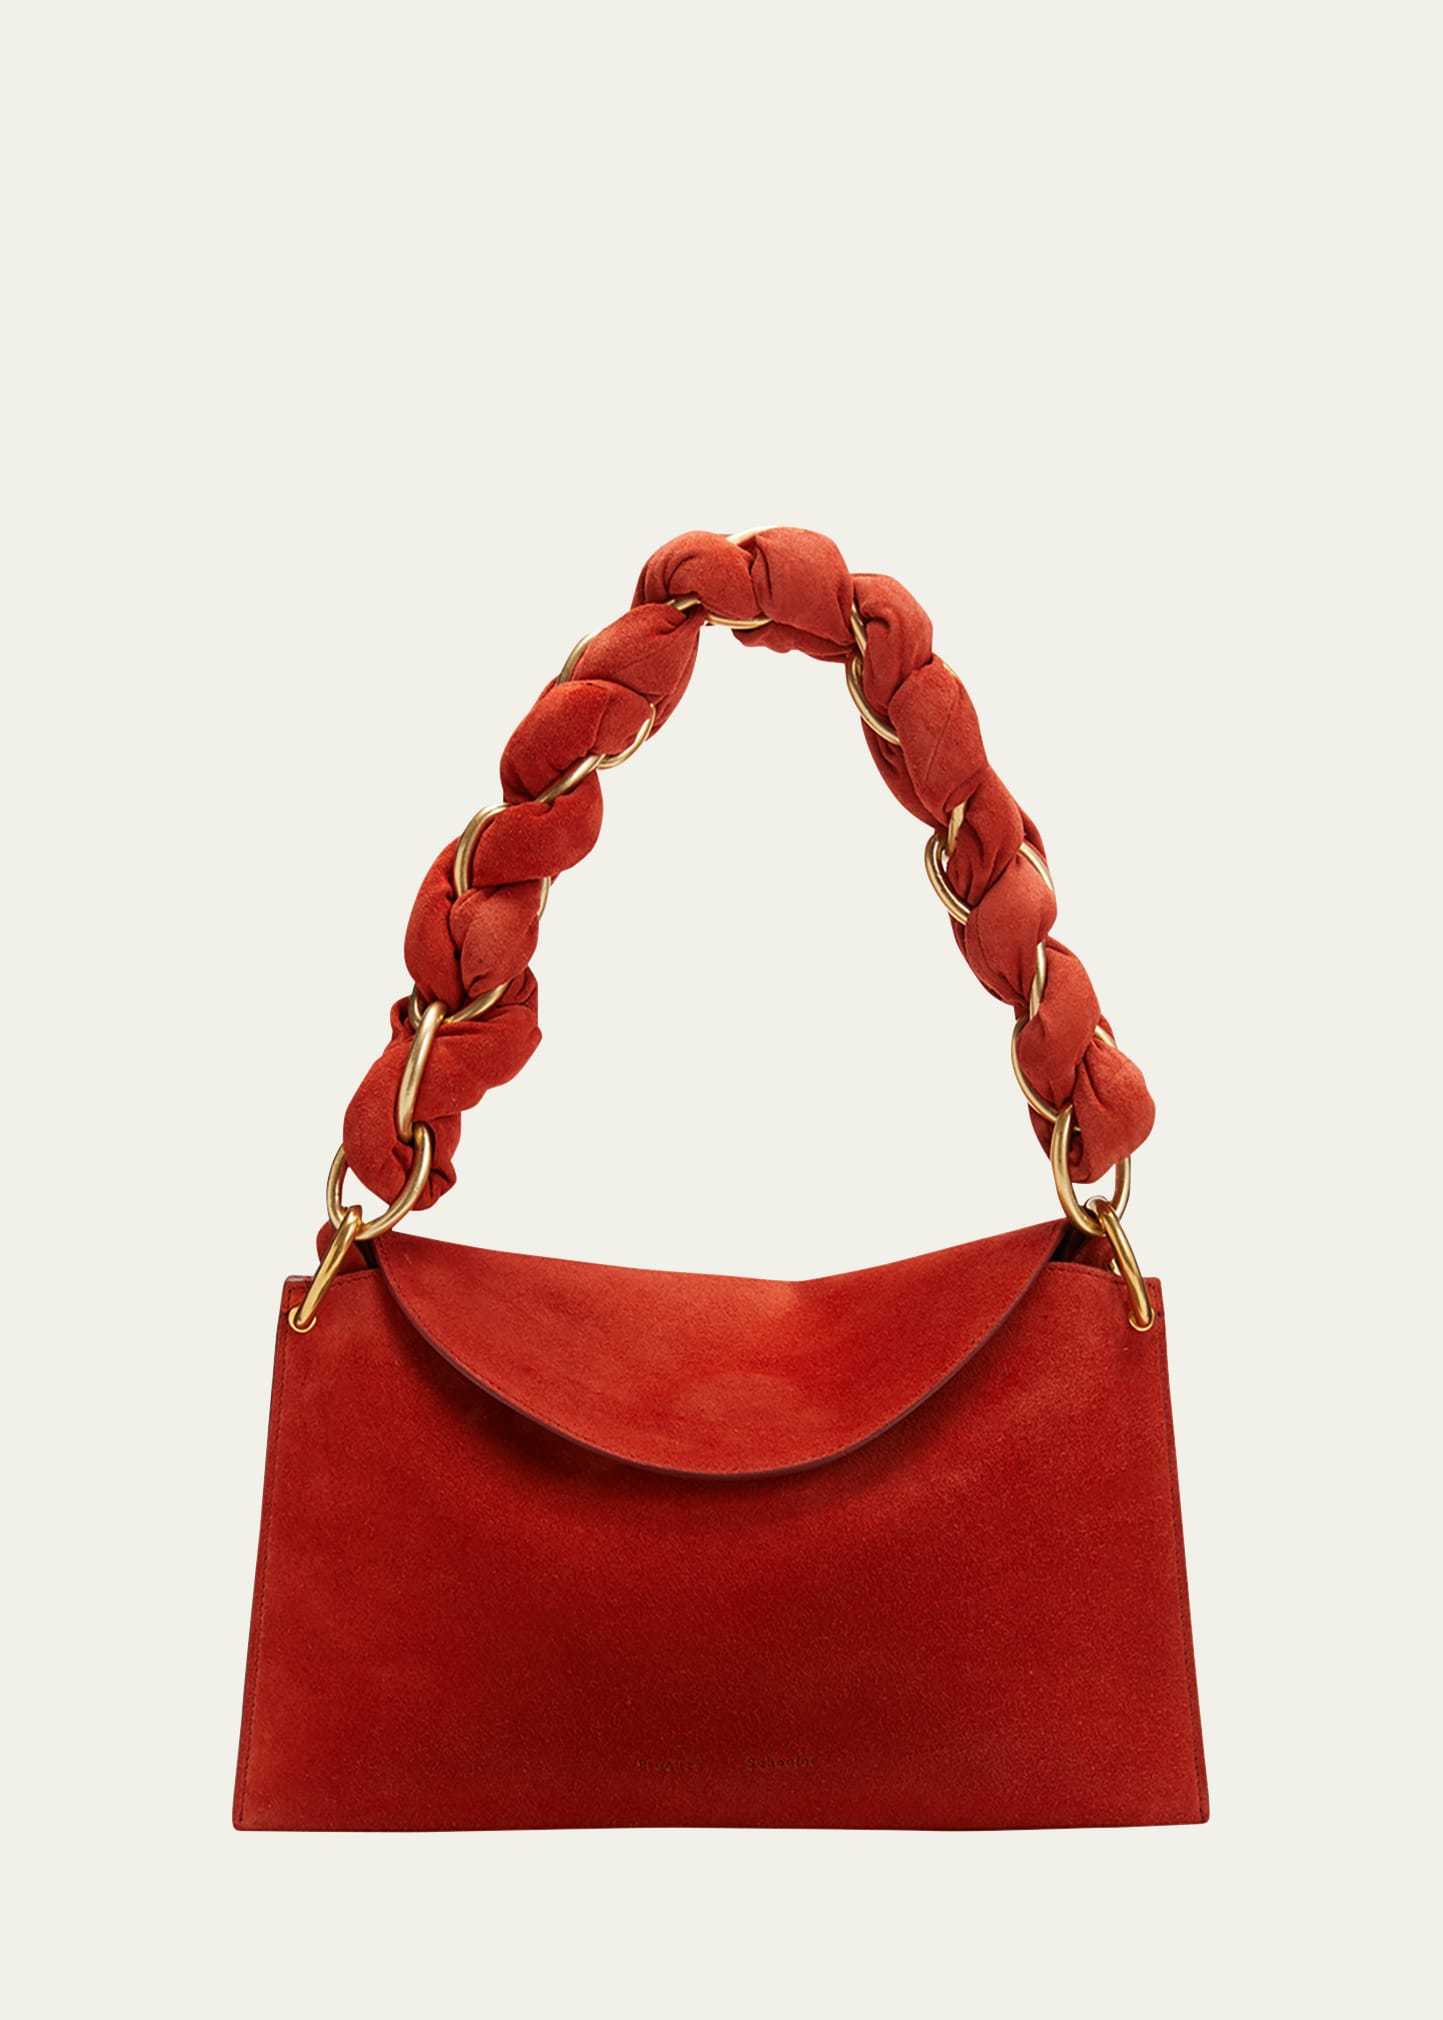 The Best Places to Buy Designer Bags For Less: Shop Sale Luxury Bags –  StyleCaster